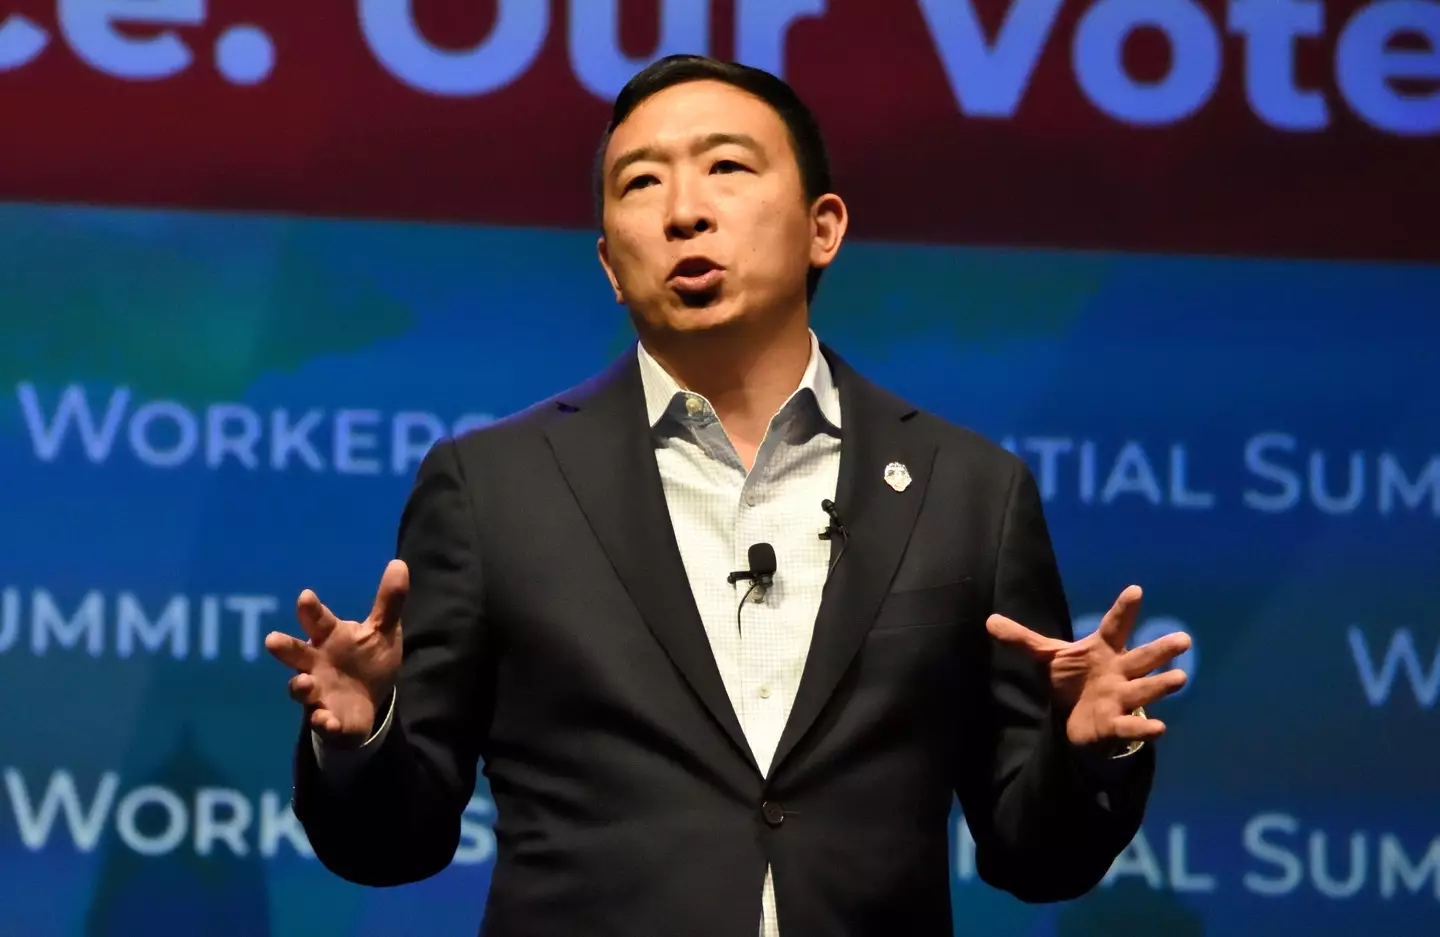 Andrew Yang stood unsuccessfully to be the Democratic presidential nominee in 2020.